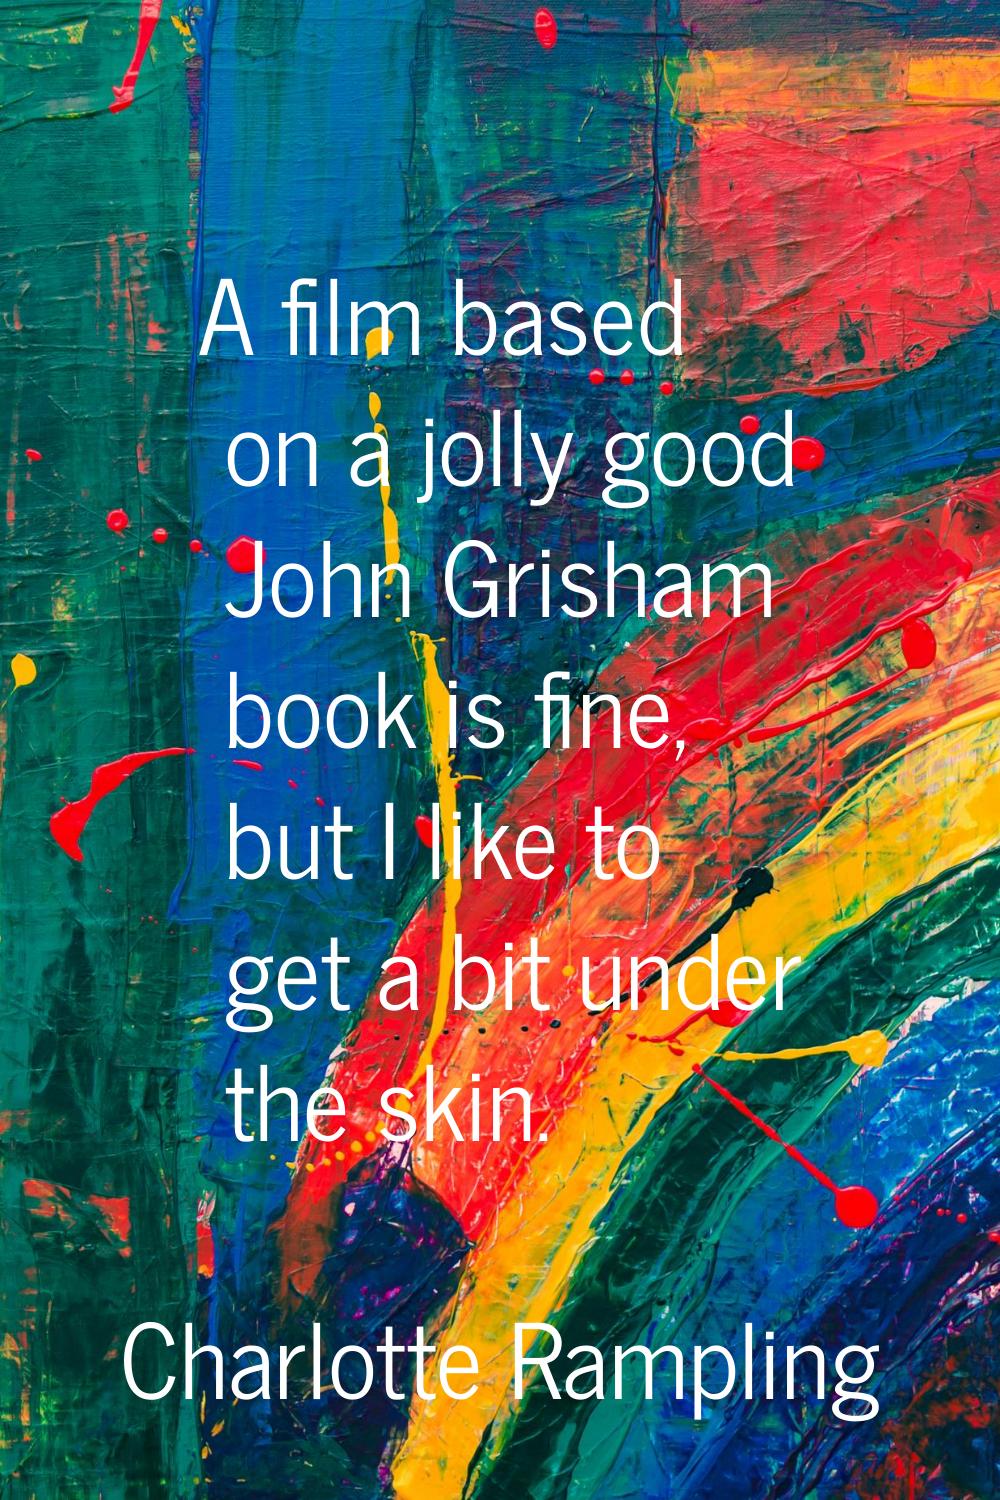 A film based on a jolly good John Grisham book is fine, but I like to get a bit under the skin.